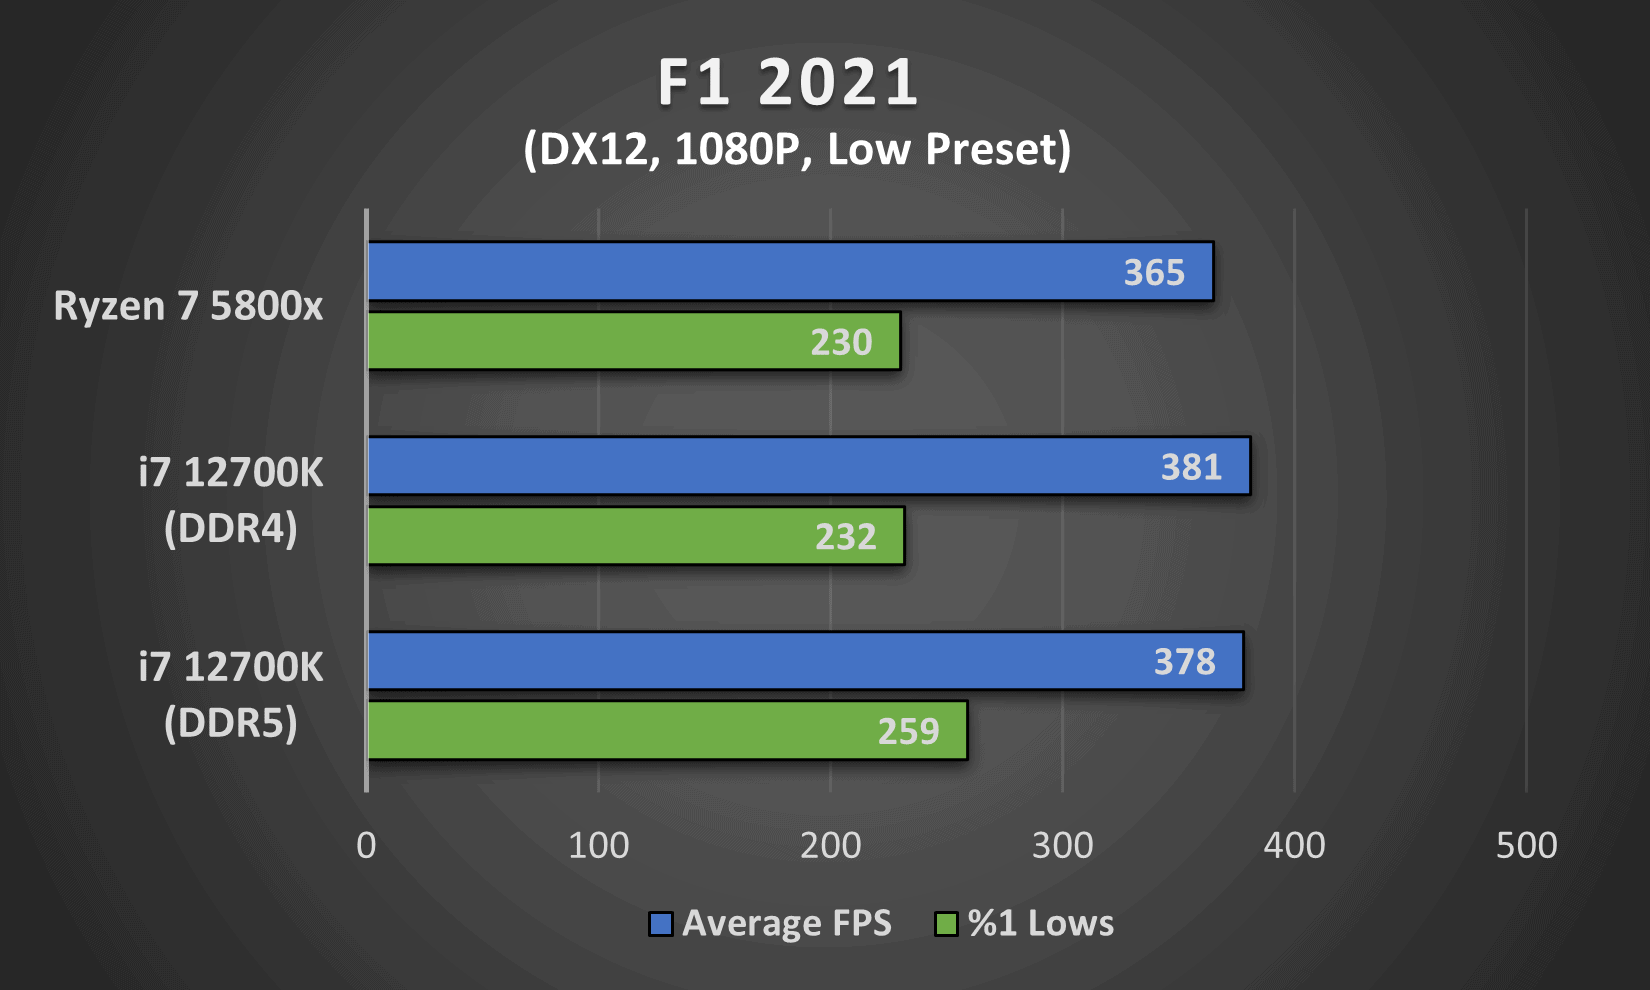 F1 2021 performance comparison between Intel's i7 12700K (DDR4 and DDR5) and AMD's Ryzen 7 5800x